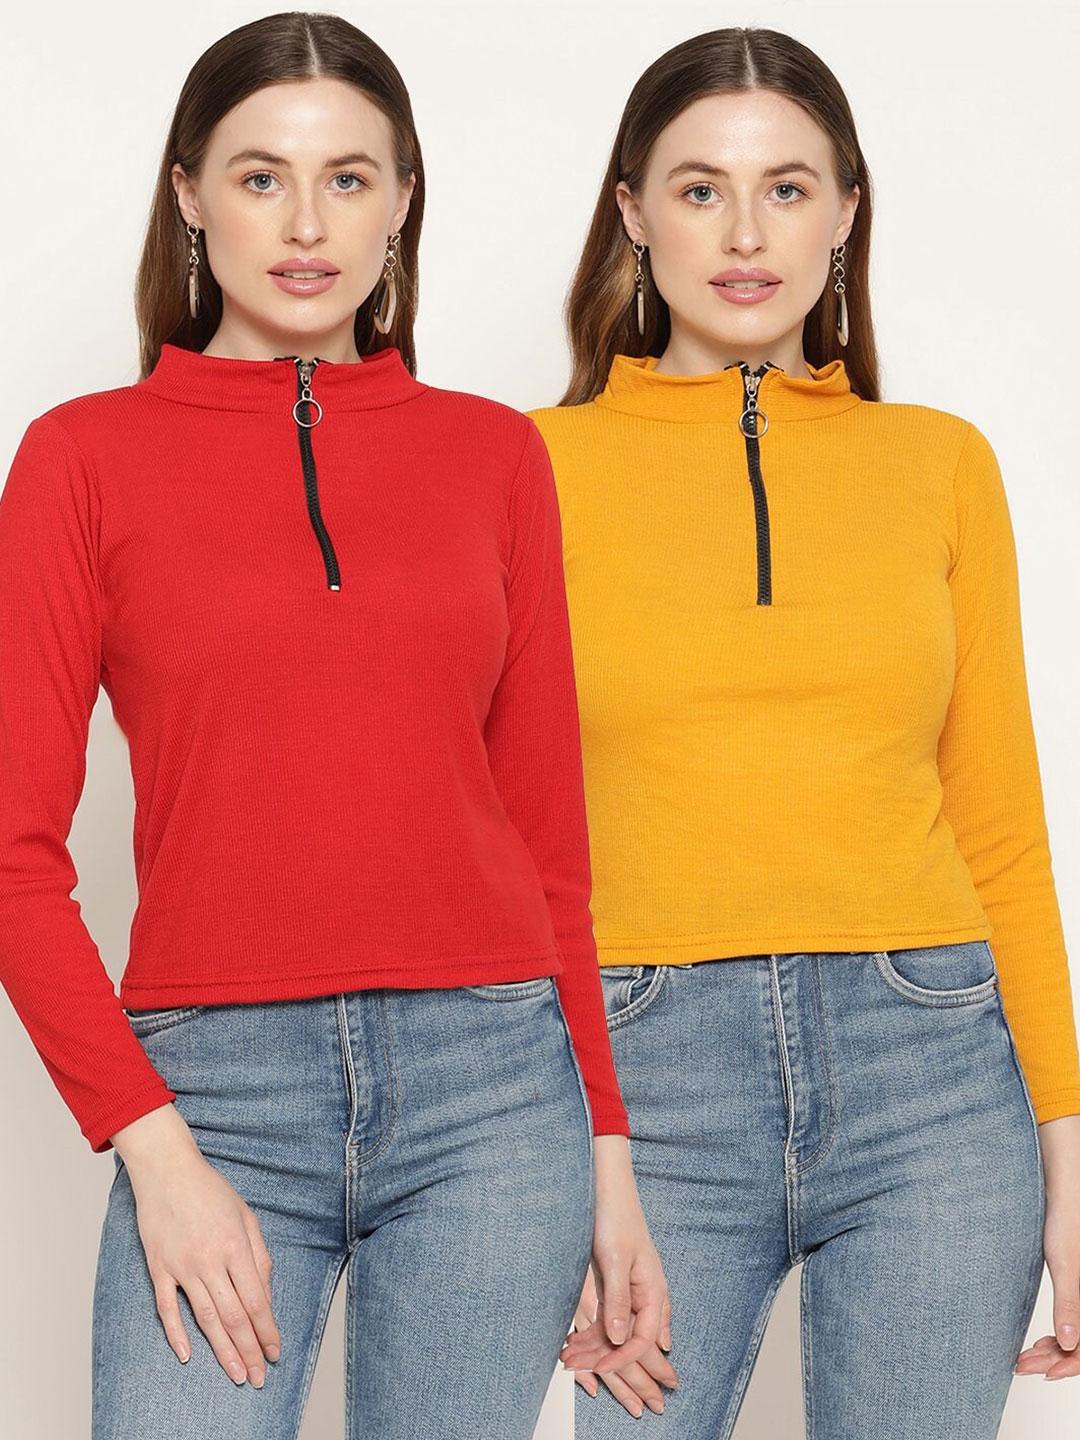 Miaz Lifestyle Red & Yellow Top